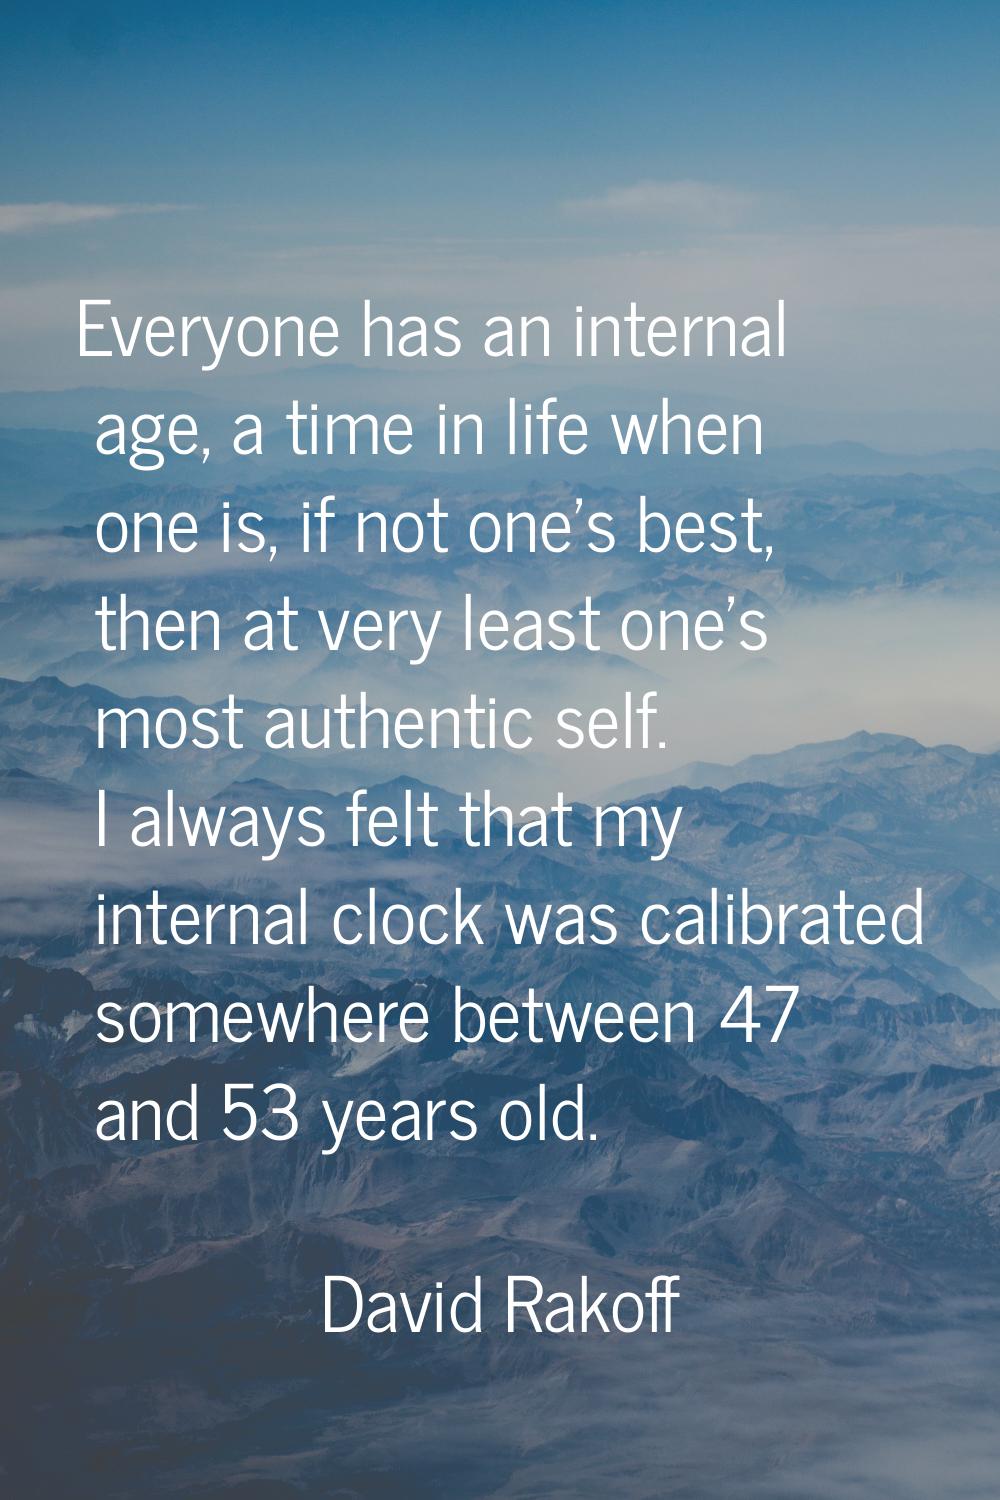 Everyone has an internal age, a time in life when one is, if not one's best, then at very least one